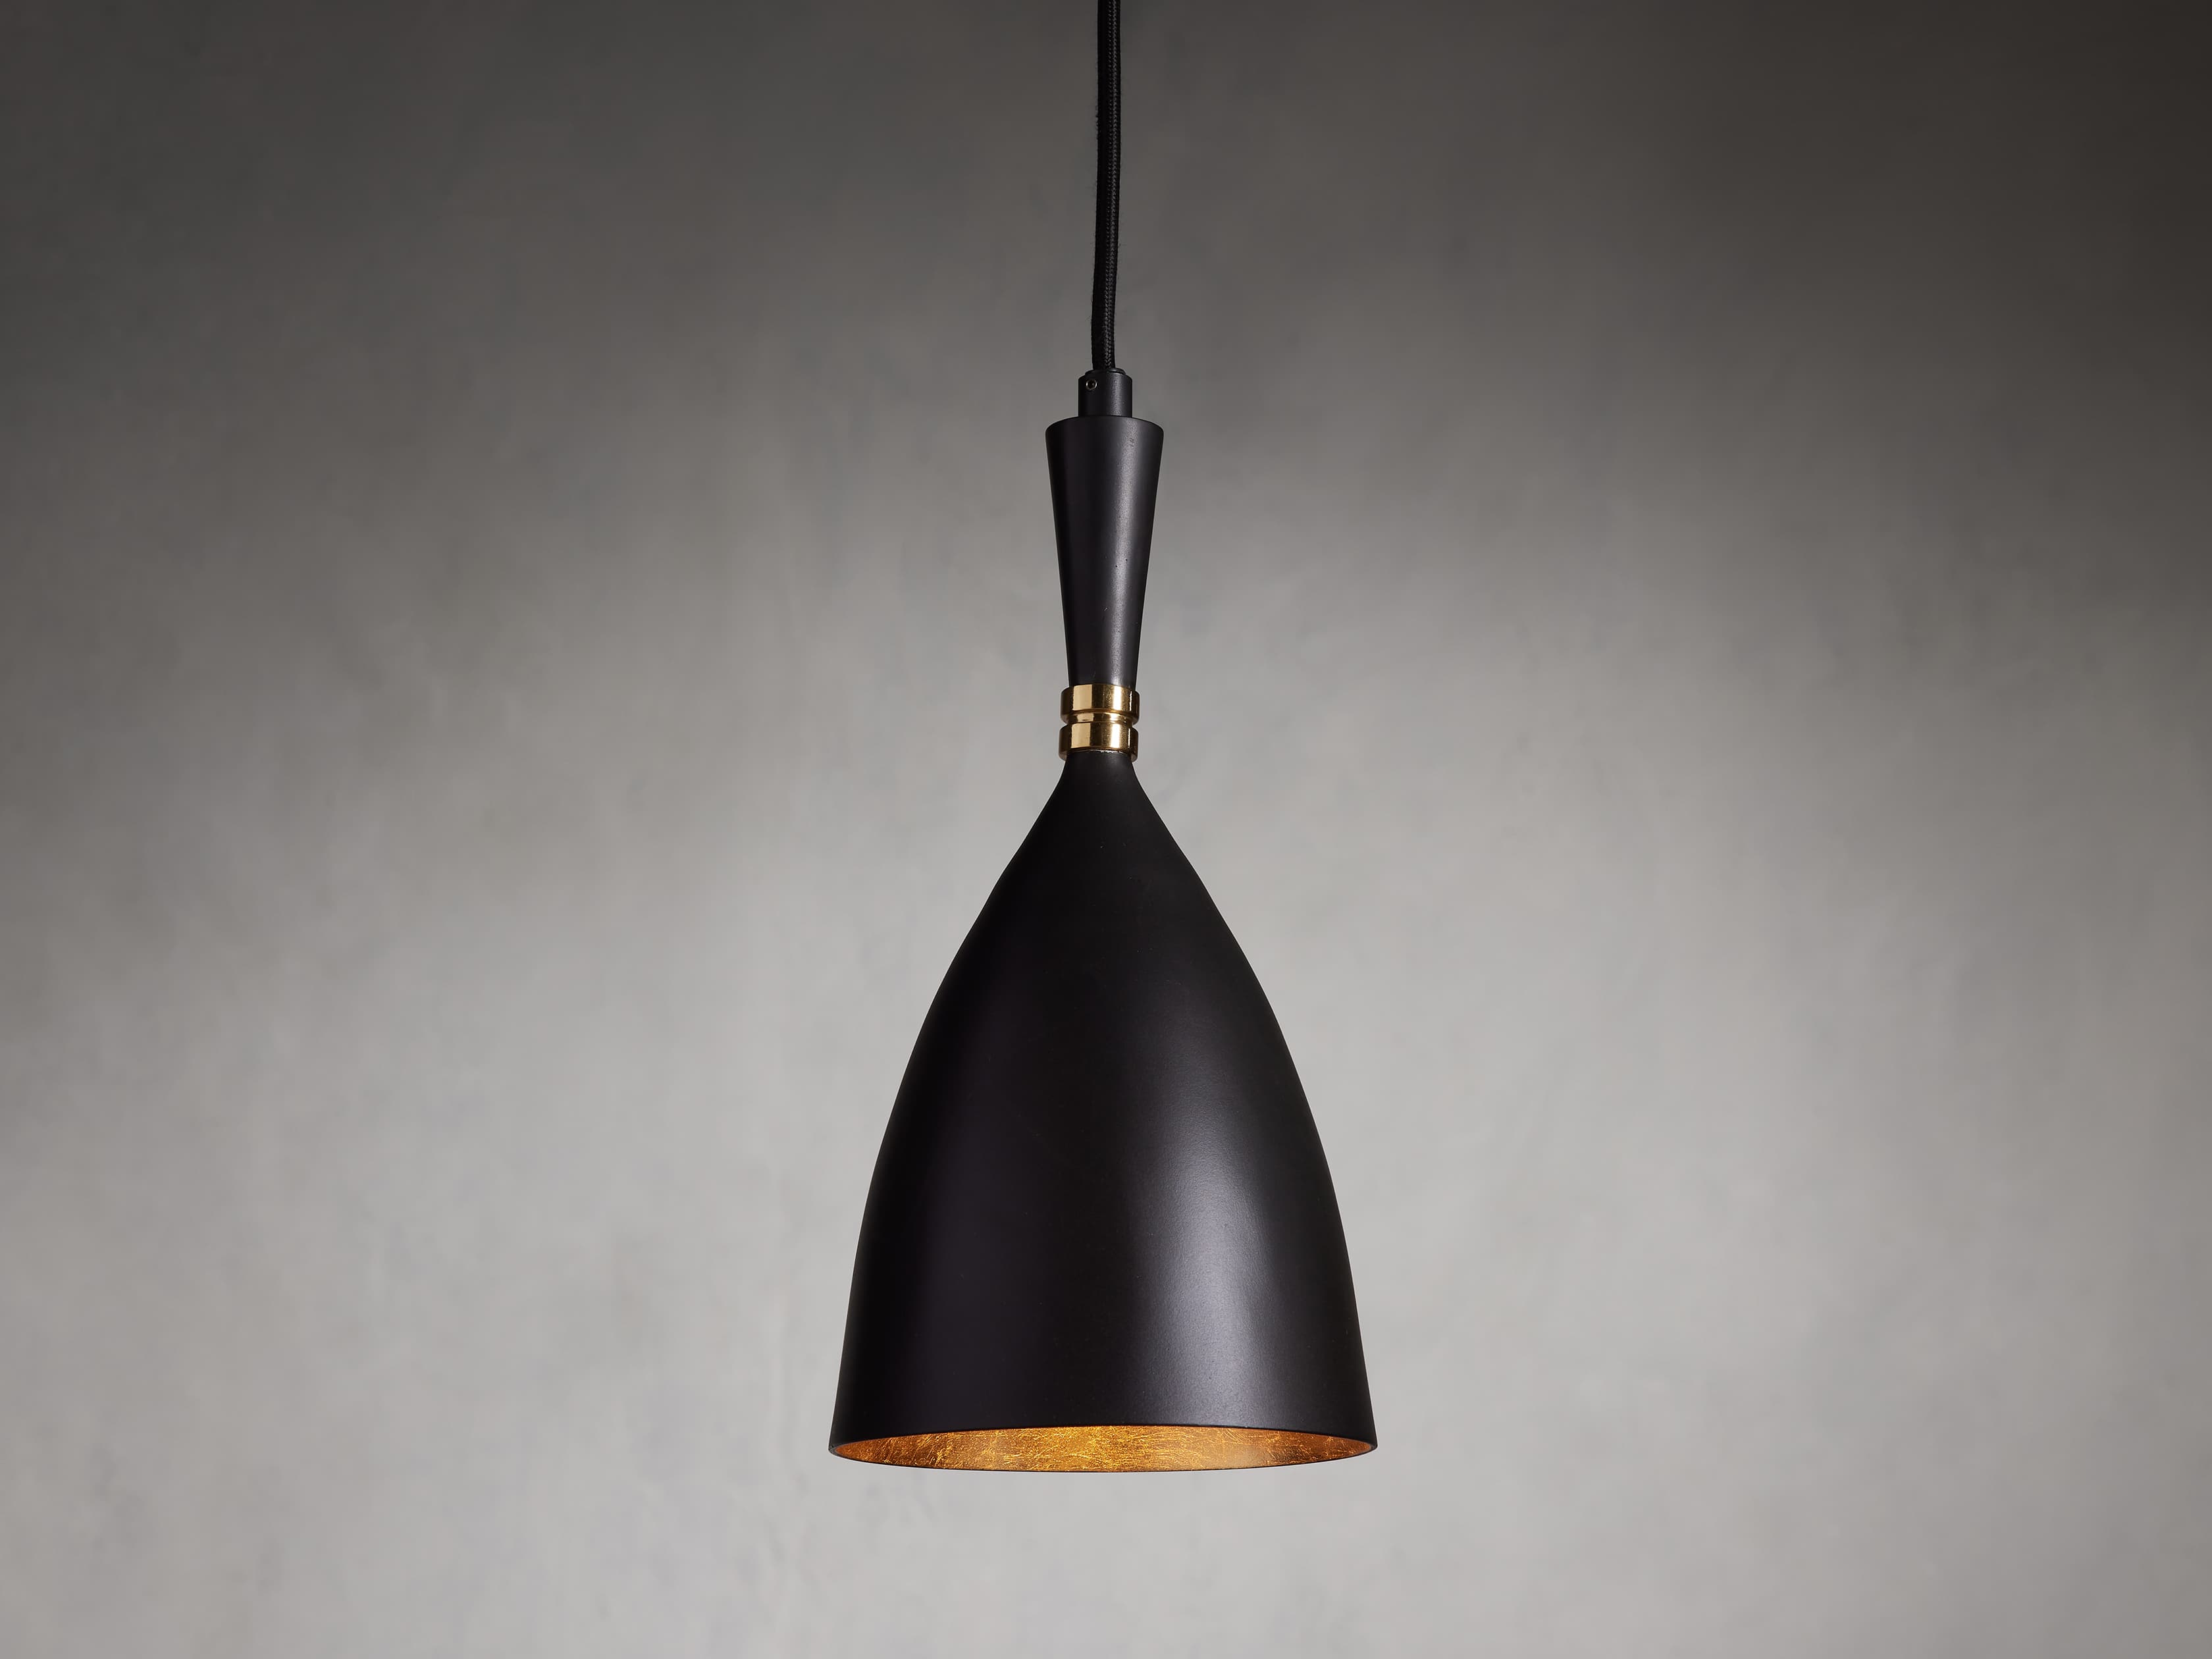 Our Watley White Cone Pendant boasts a modern and minimalistic design with  a chic brass finish on its inter…